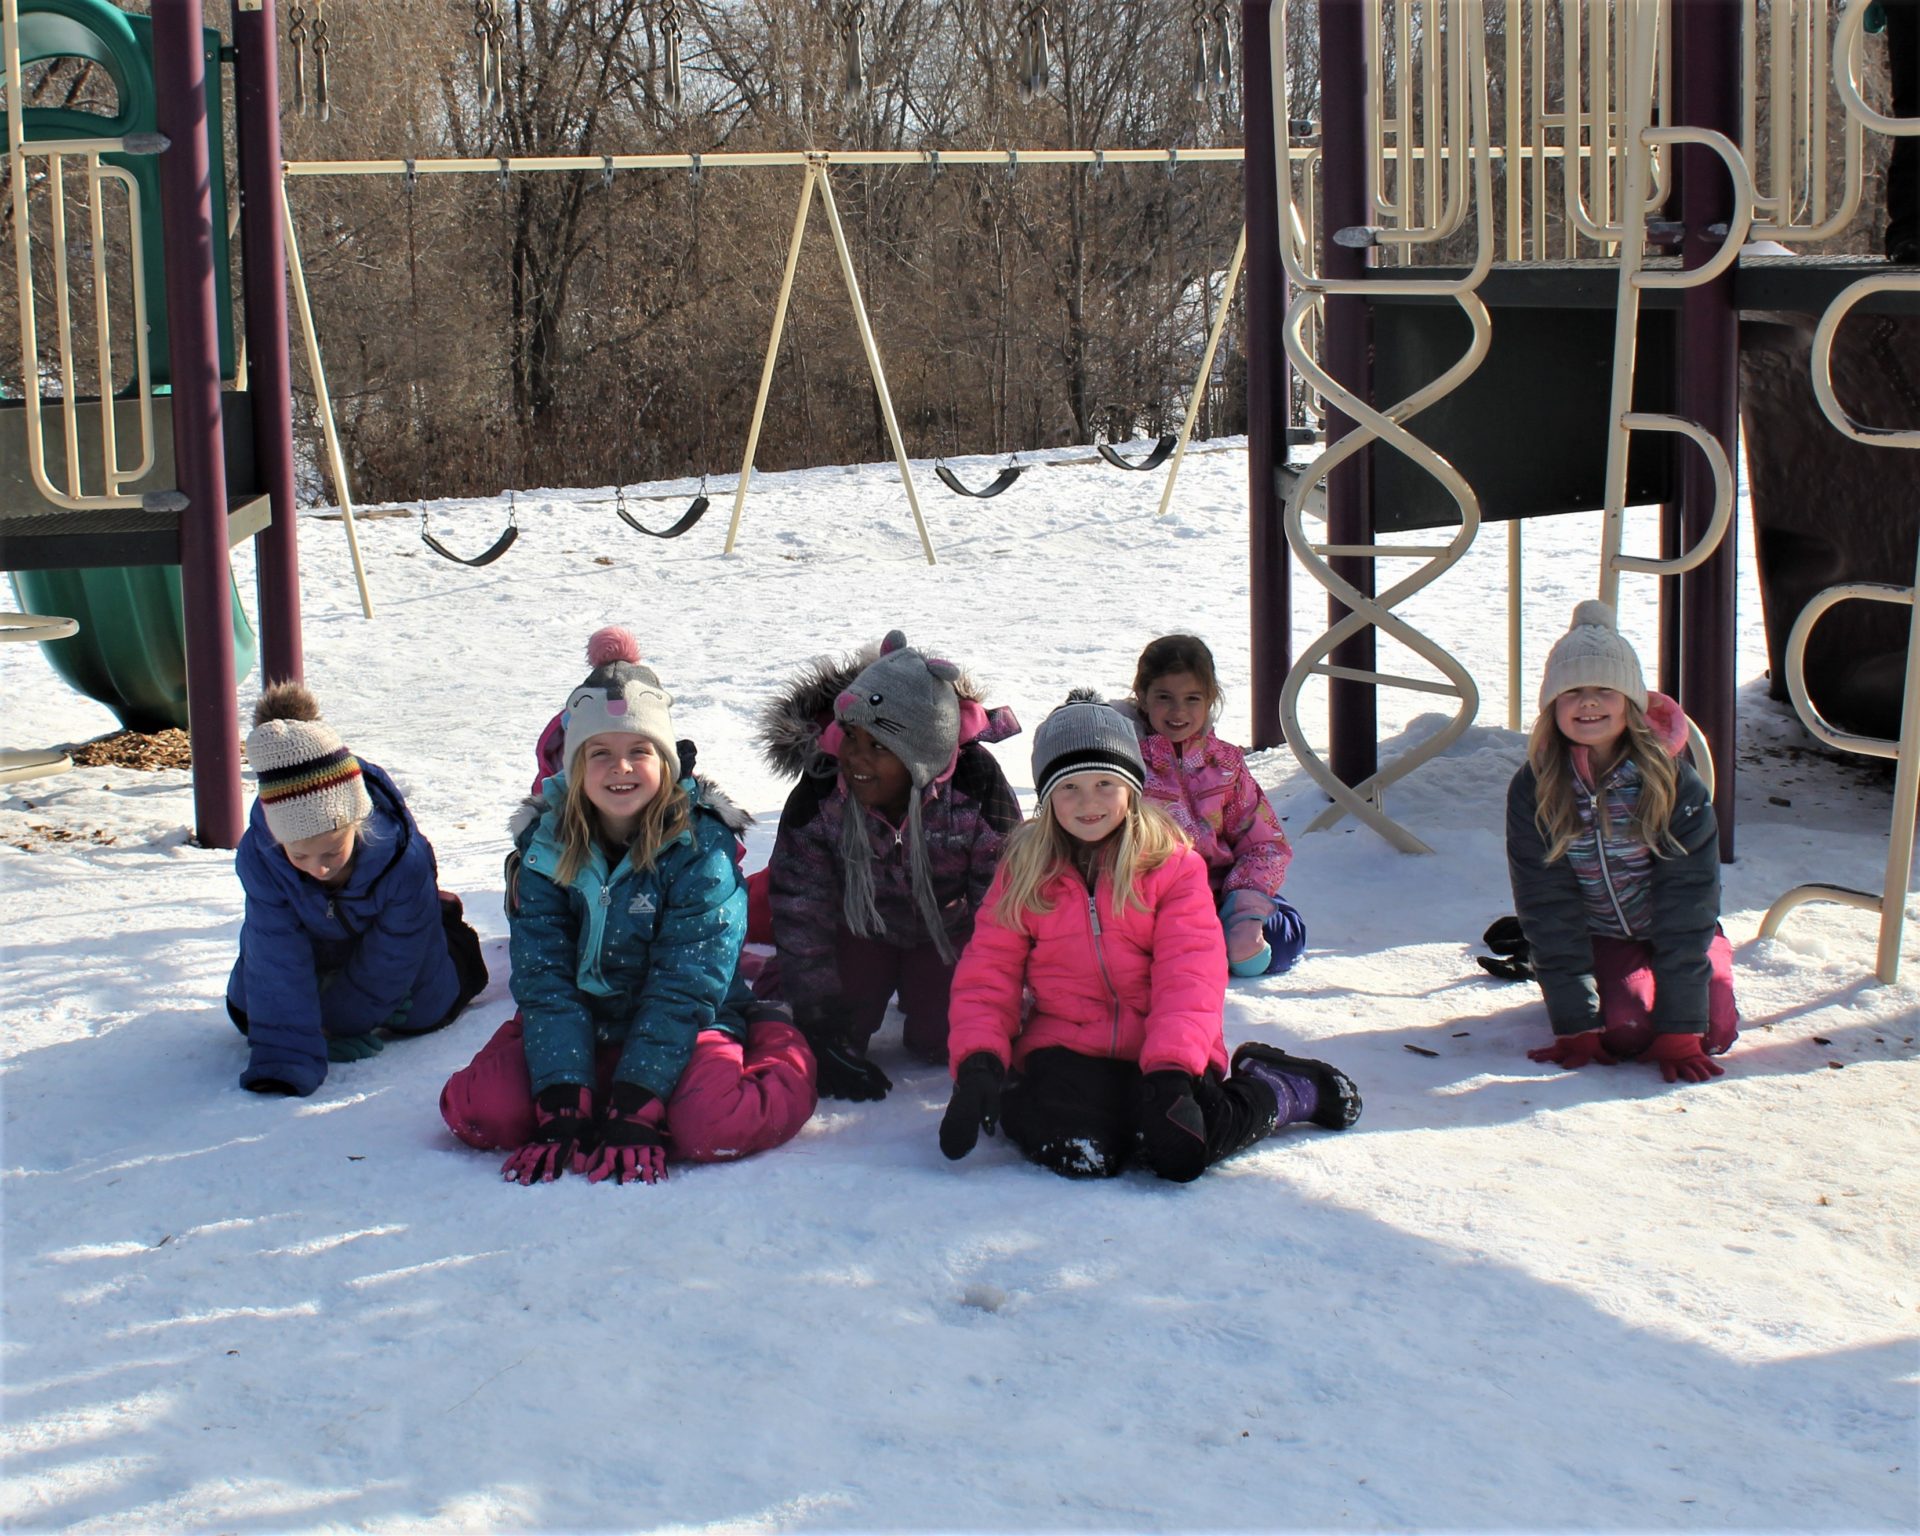 A group of children in their snow gear by the swing set.